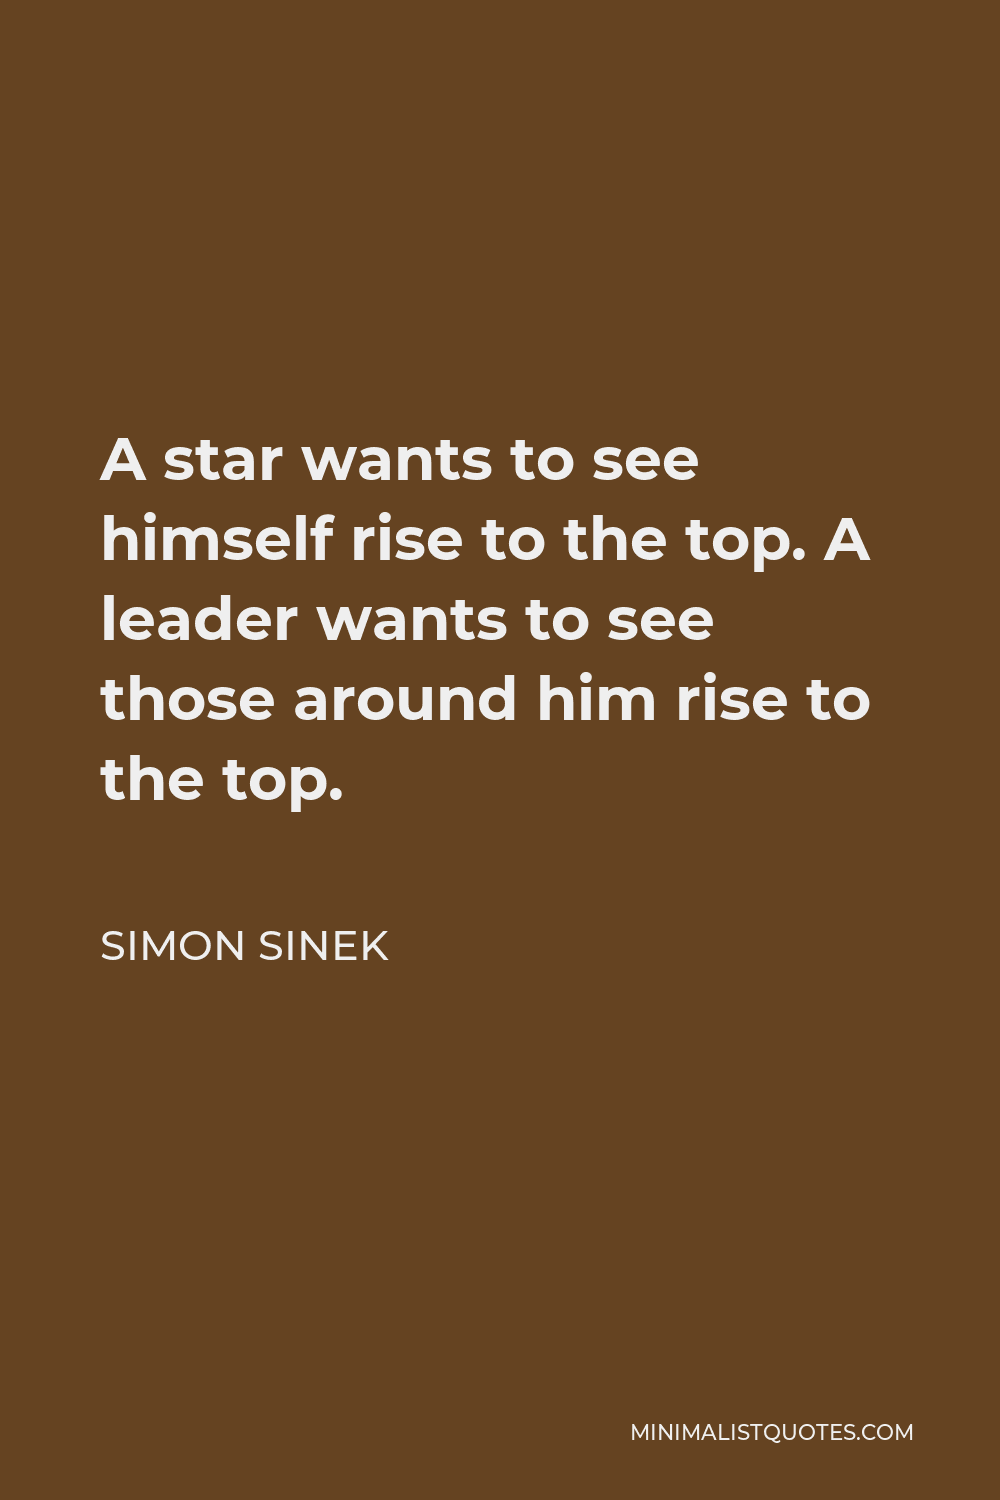 Simon Sinek Quote - A star wants to see himself rise to the top. A leader wants to see those around him rise to the top.